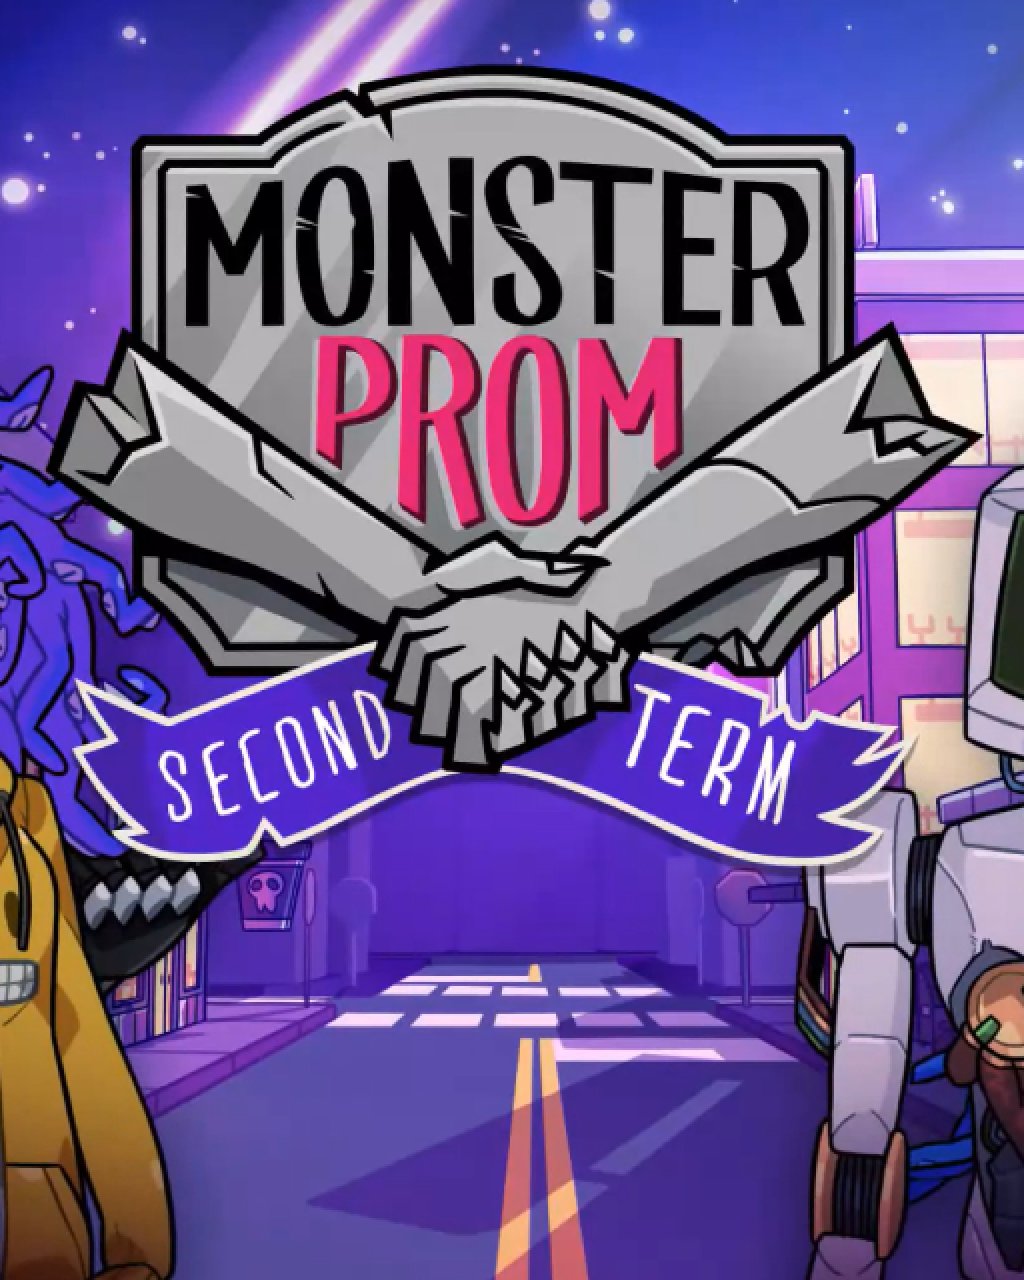 ESD Monster Prom Second Term